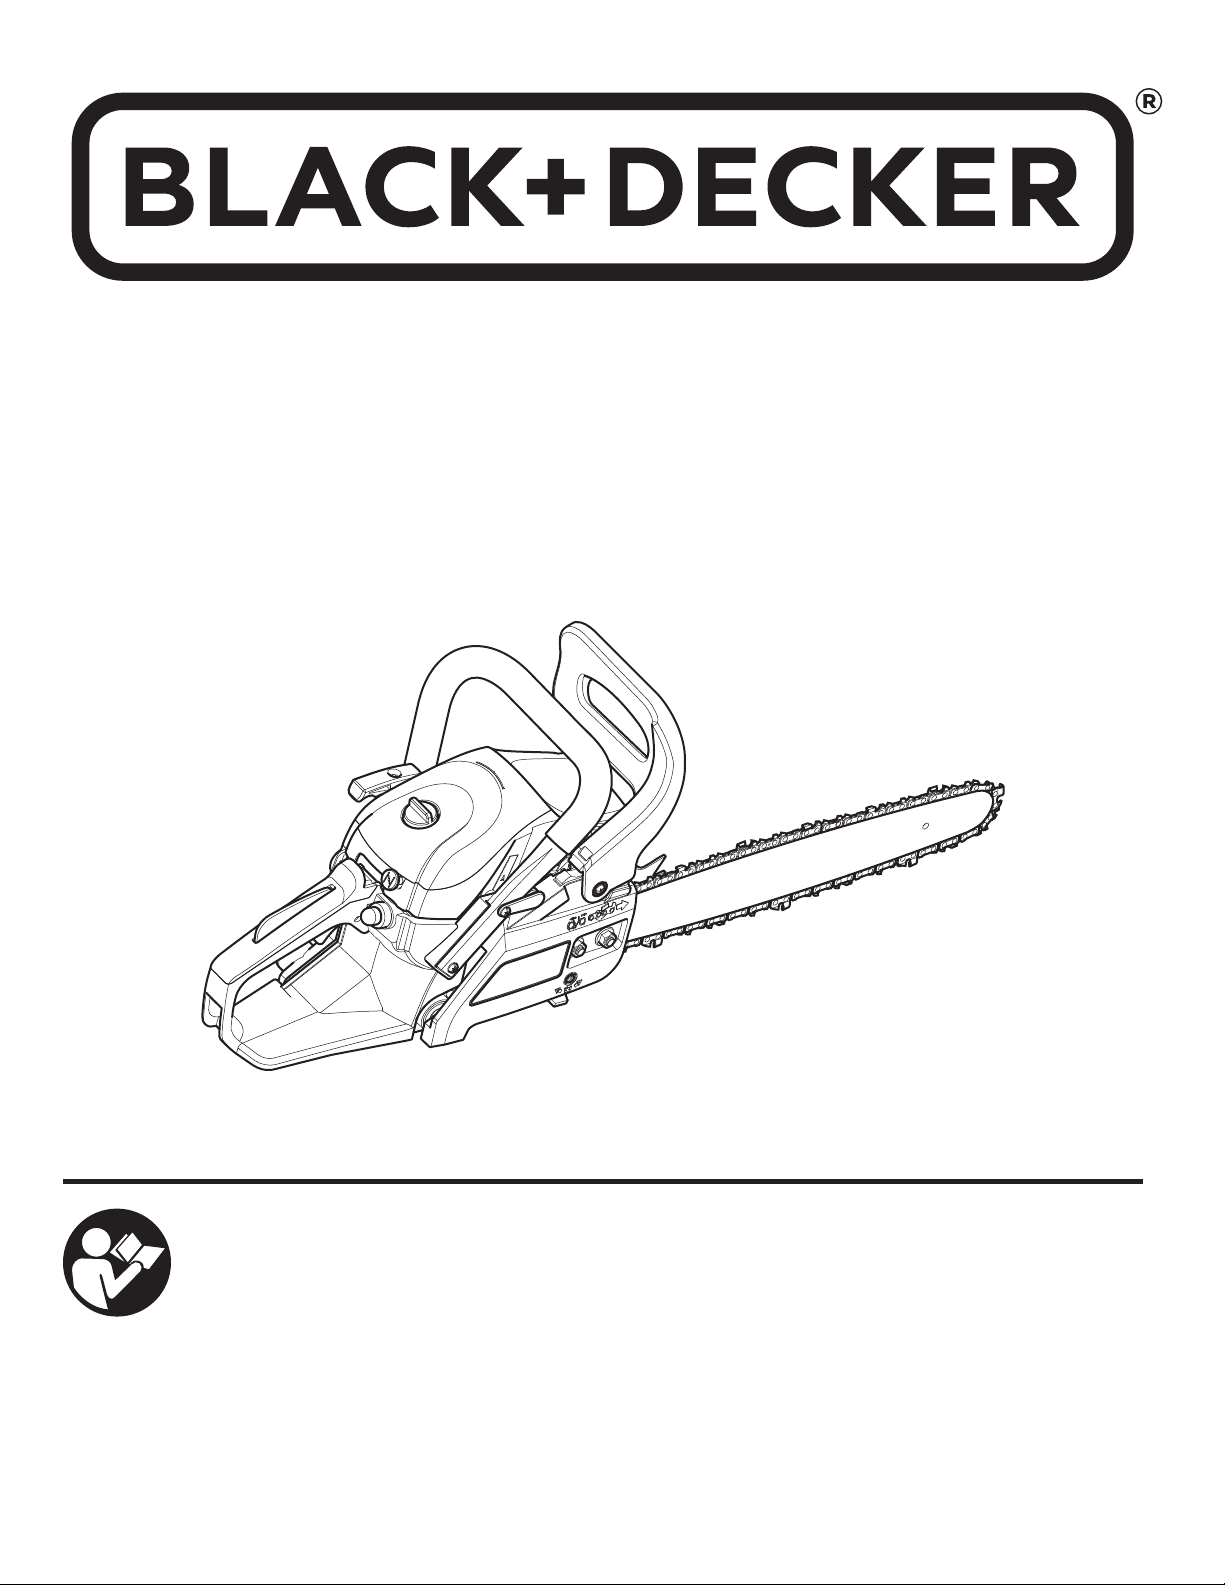 User manual Black & Decker DC1005 (English - 16 pages)